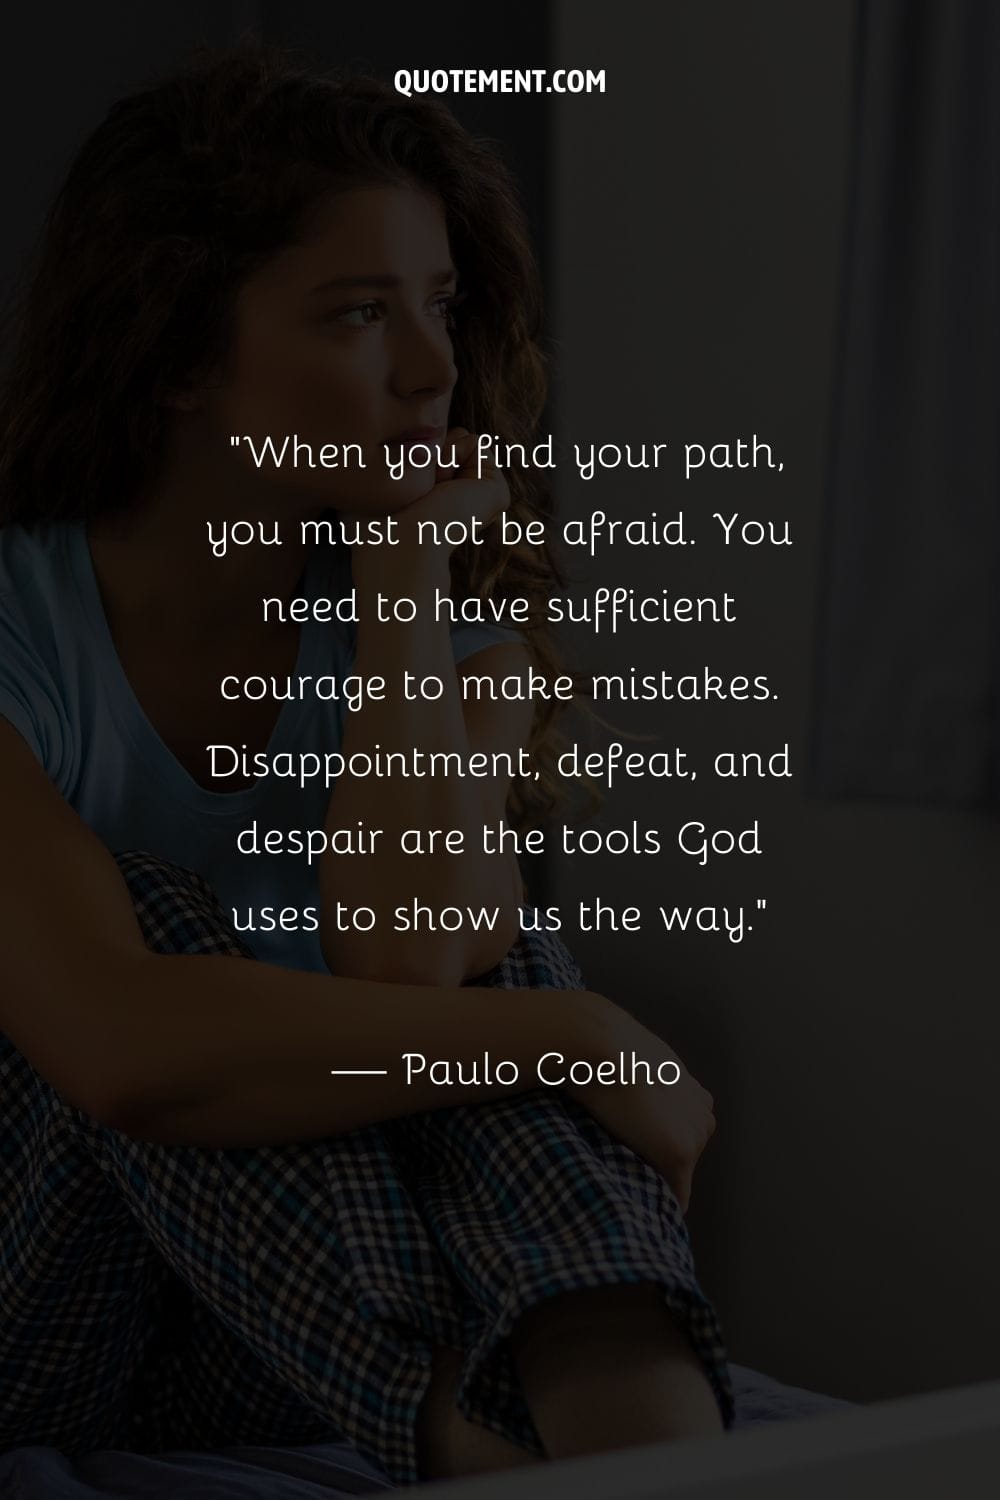 Disappointment, defeat, and despair are the tools God uses to show us the way